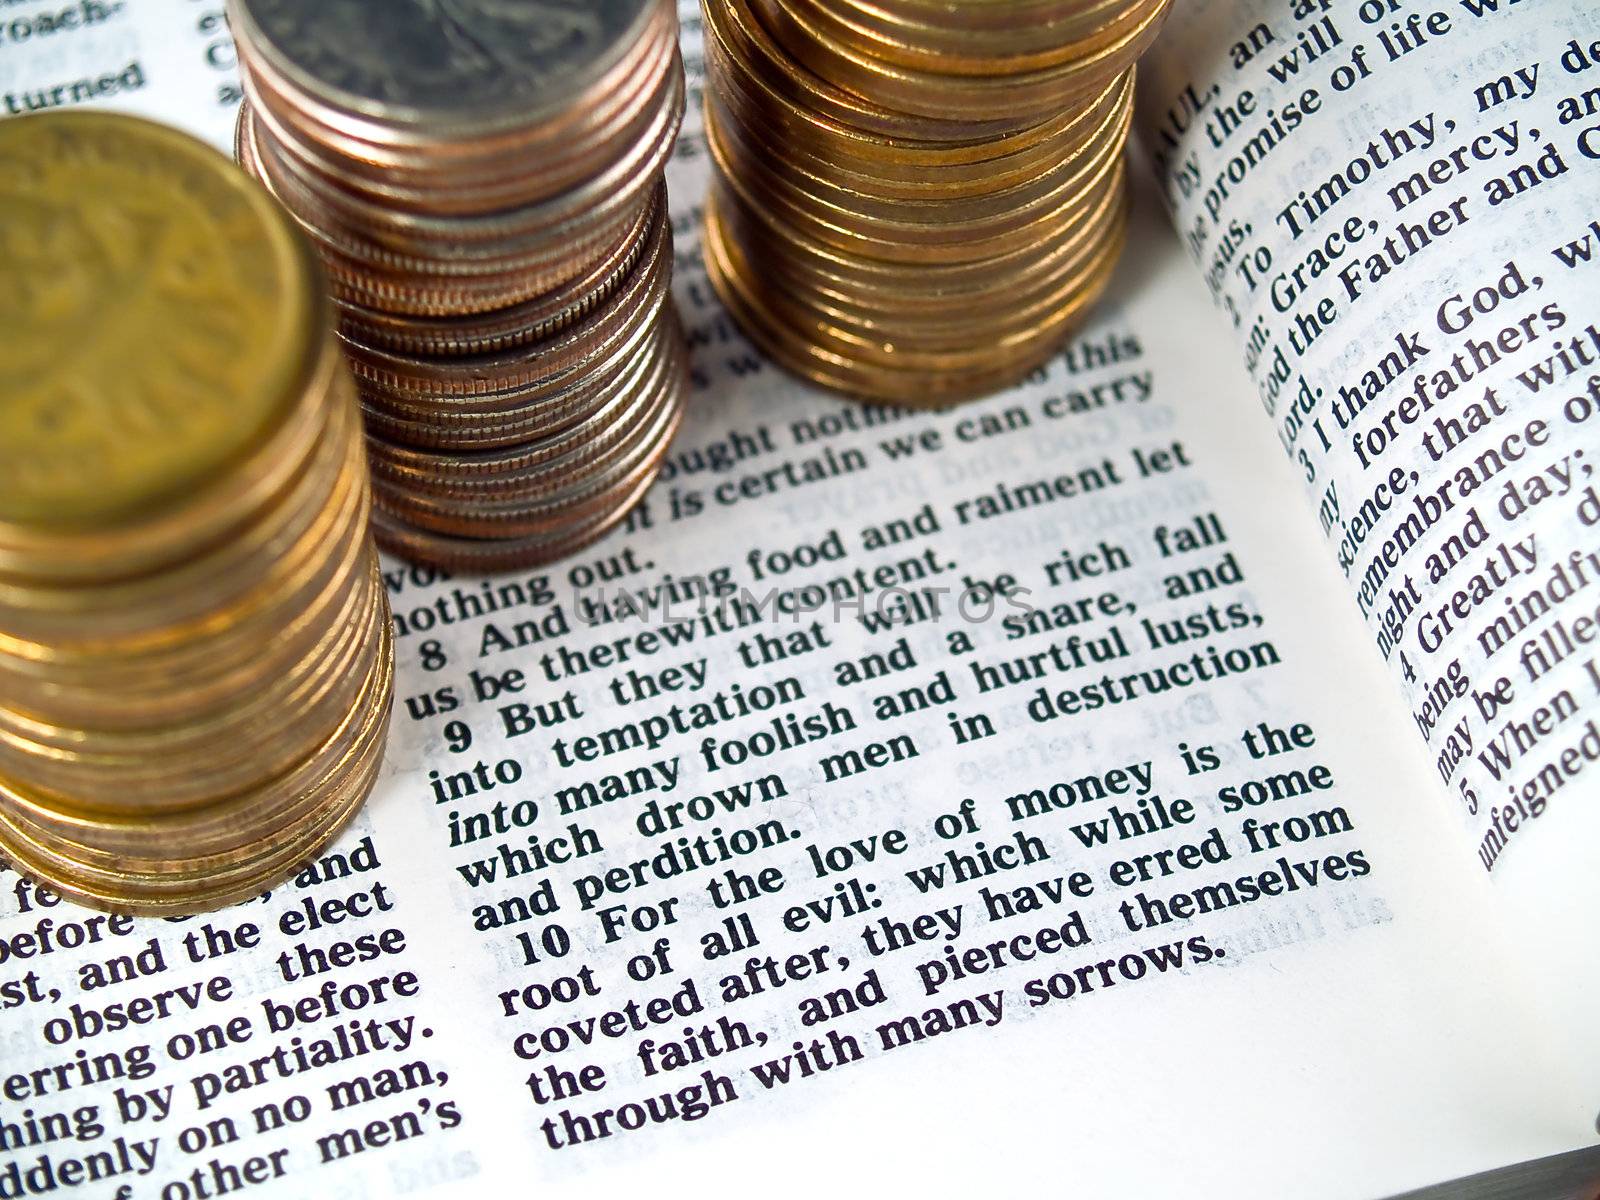 The Bible opened to I Timothy 6: 10 Love of Money